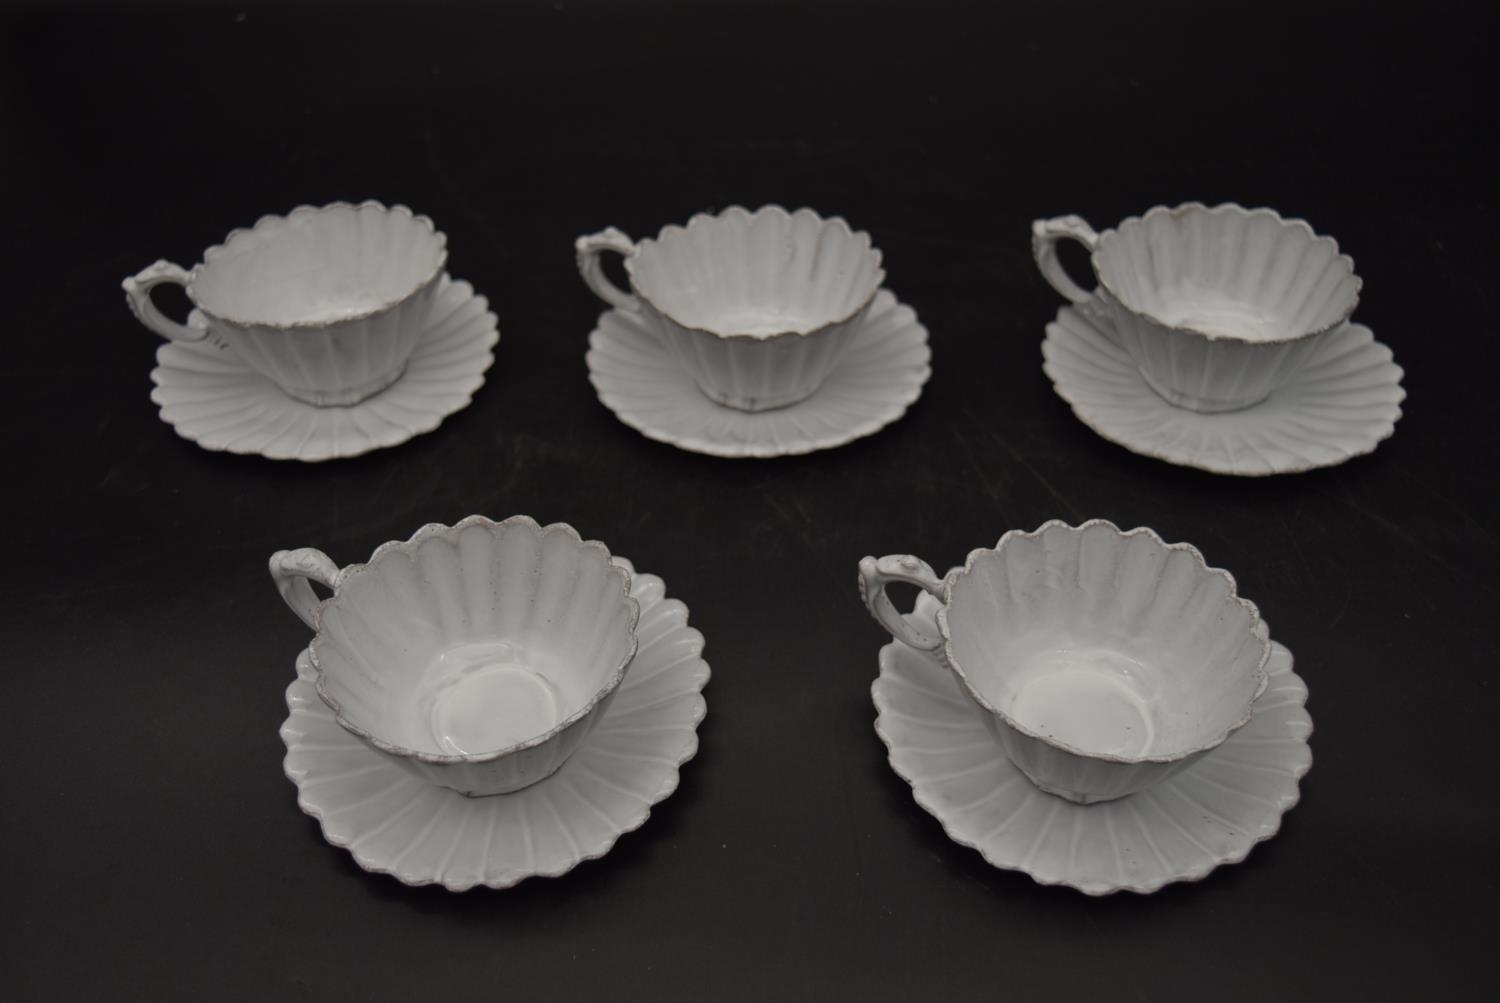 A set of five Astier de Villatte cups and saucers along with a pair of similar pendant light shades. - Image 9 of 17